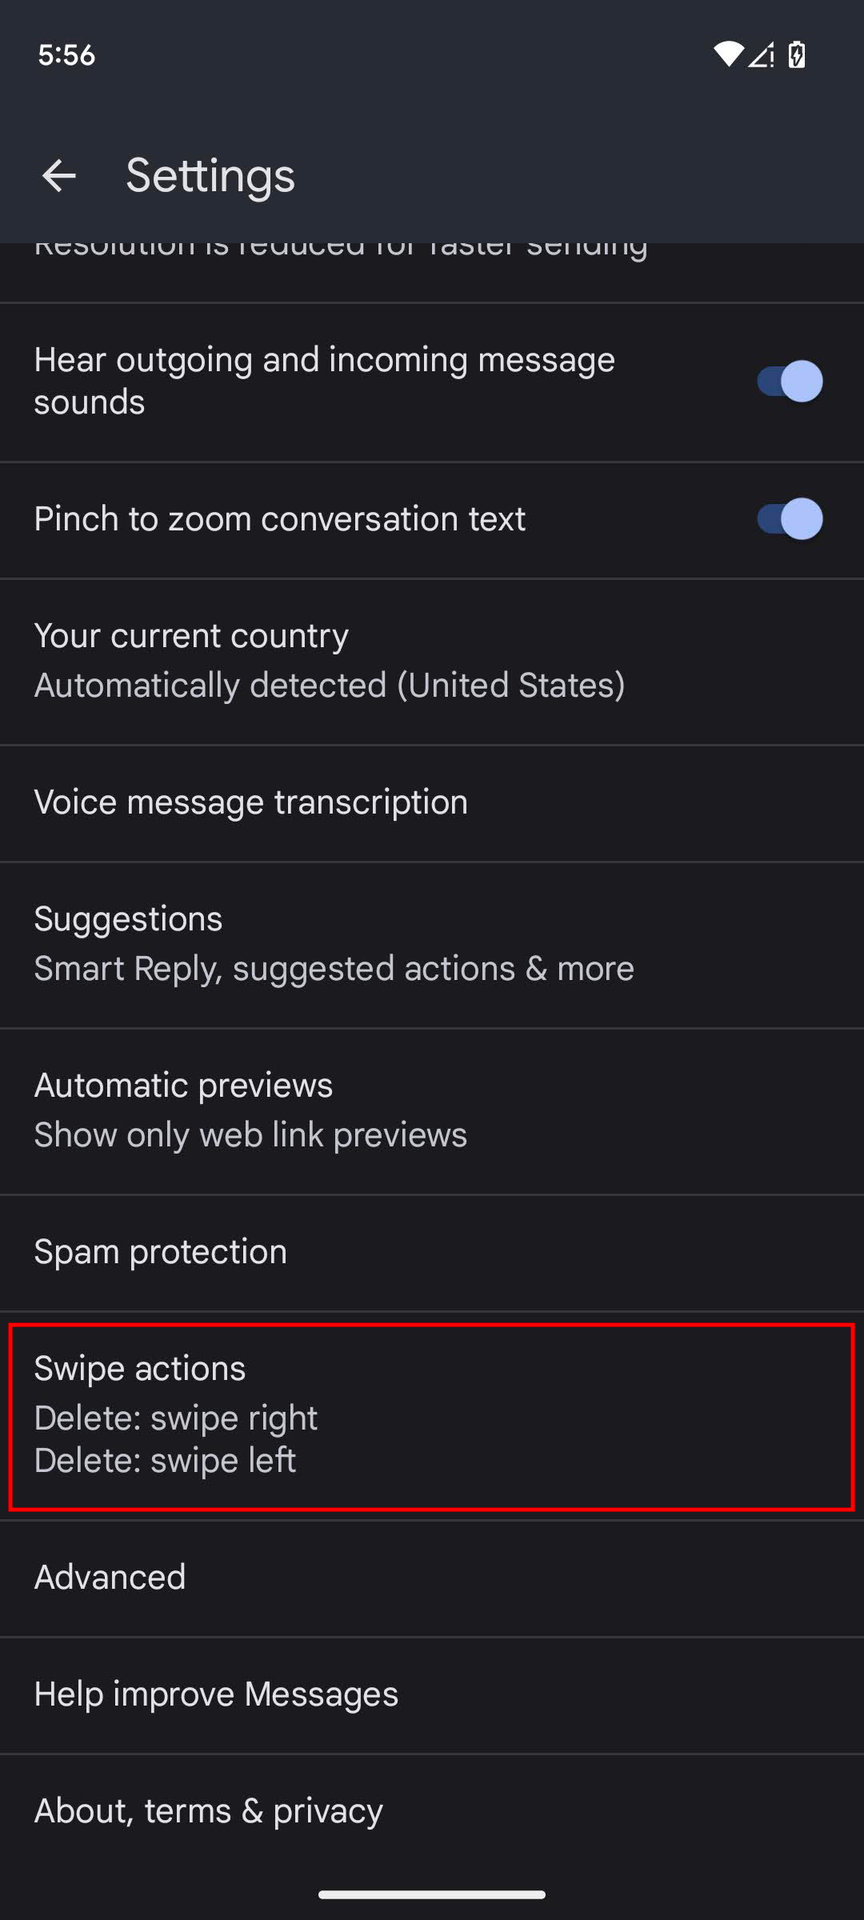 How to edit Swipe actions on Google Messages 3